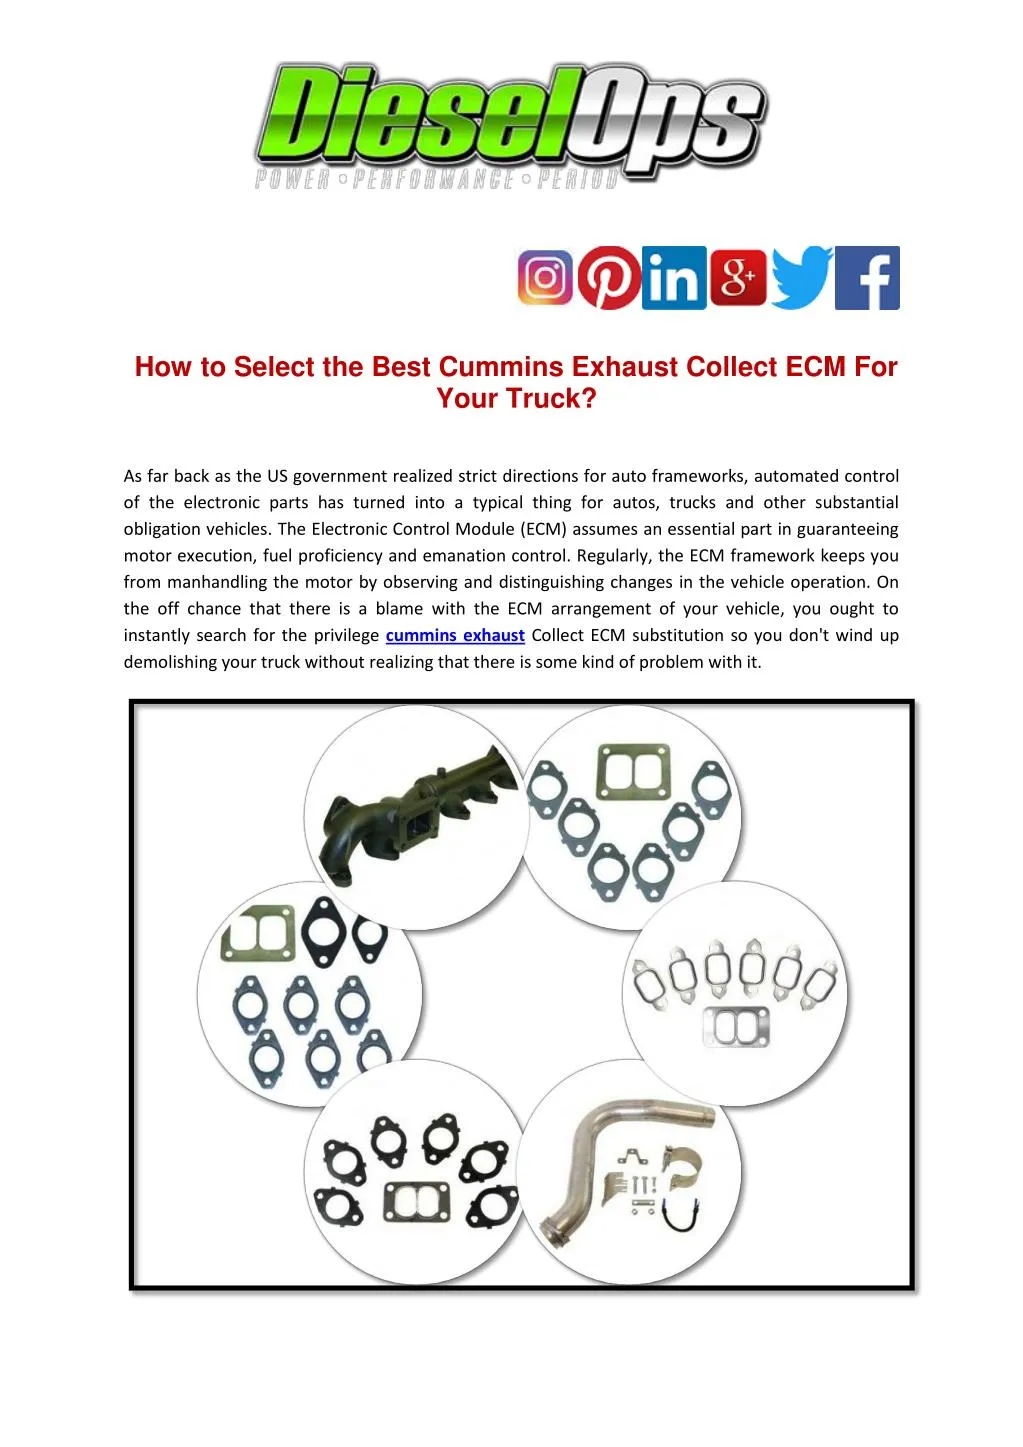 how to select the best cummins exhaust collect